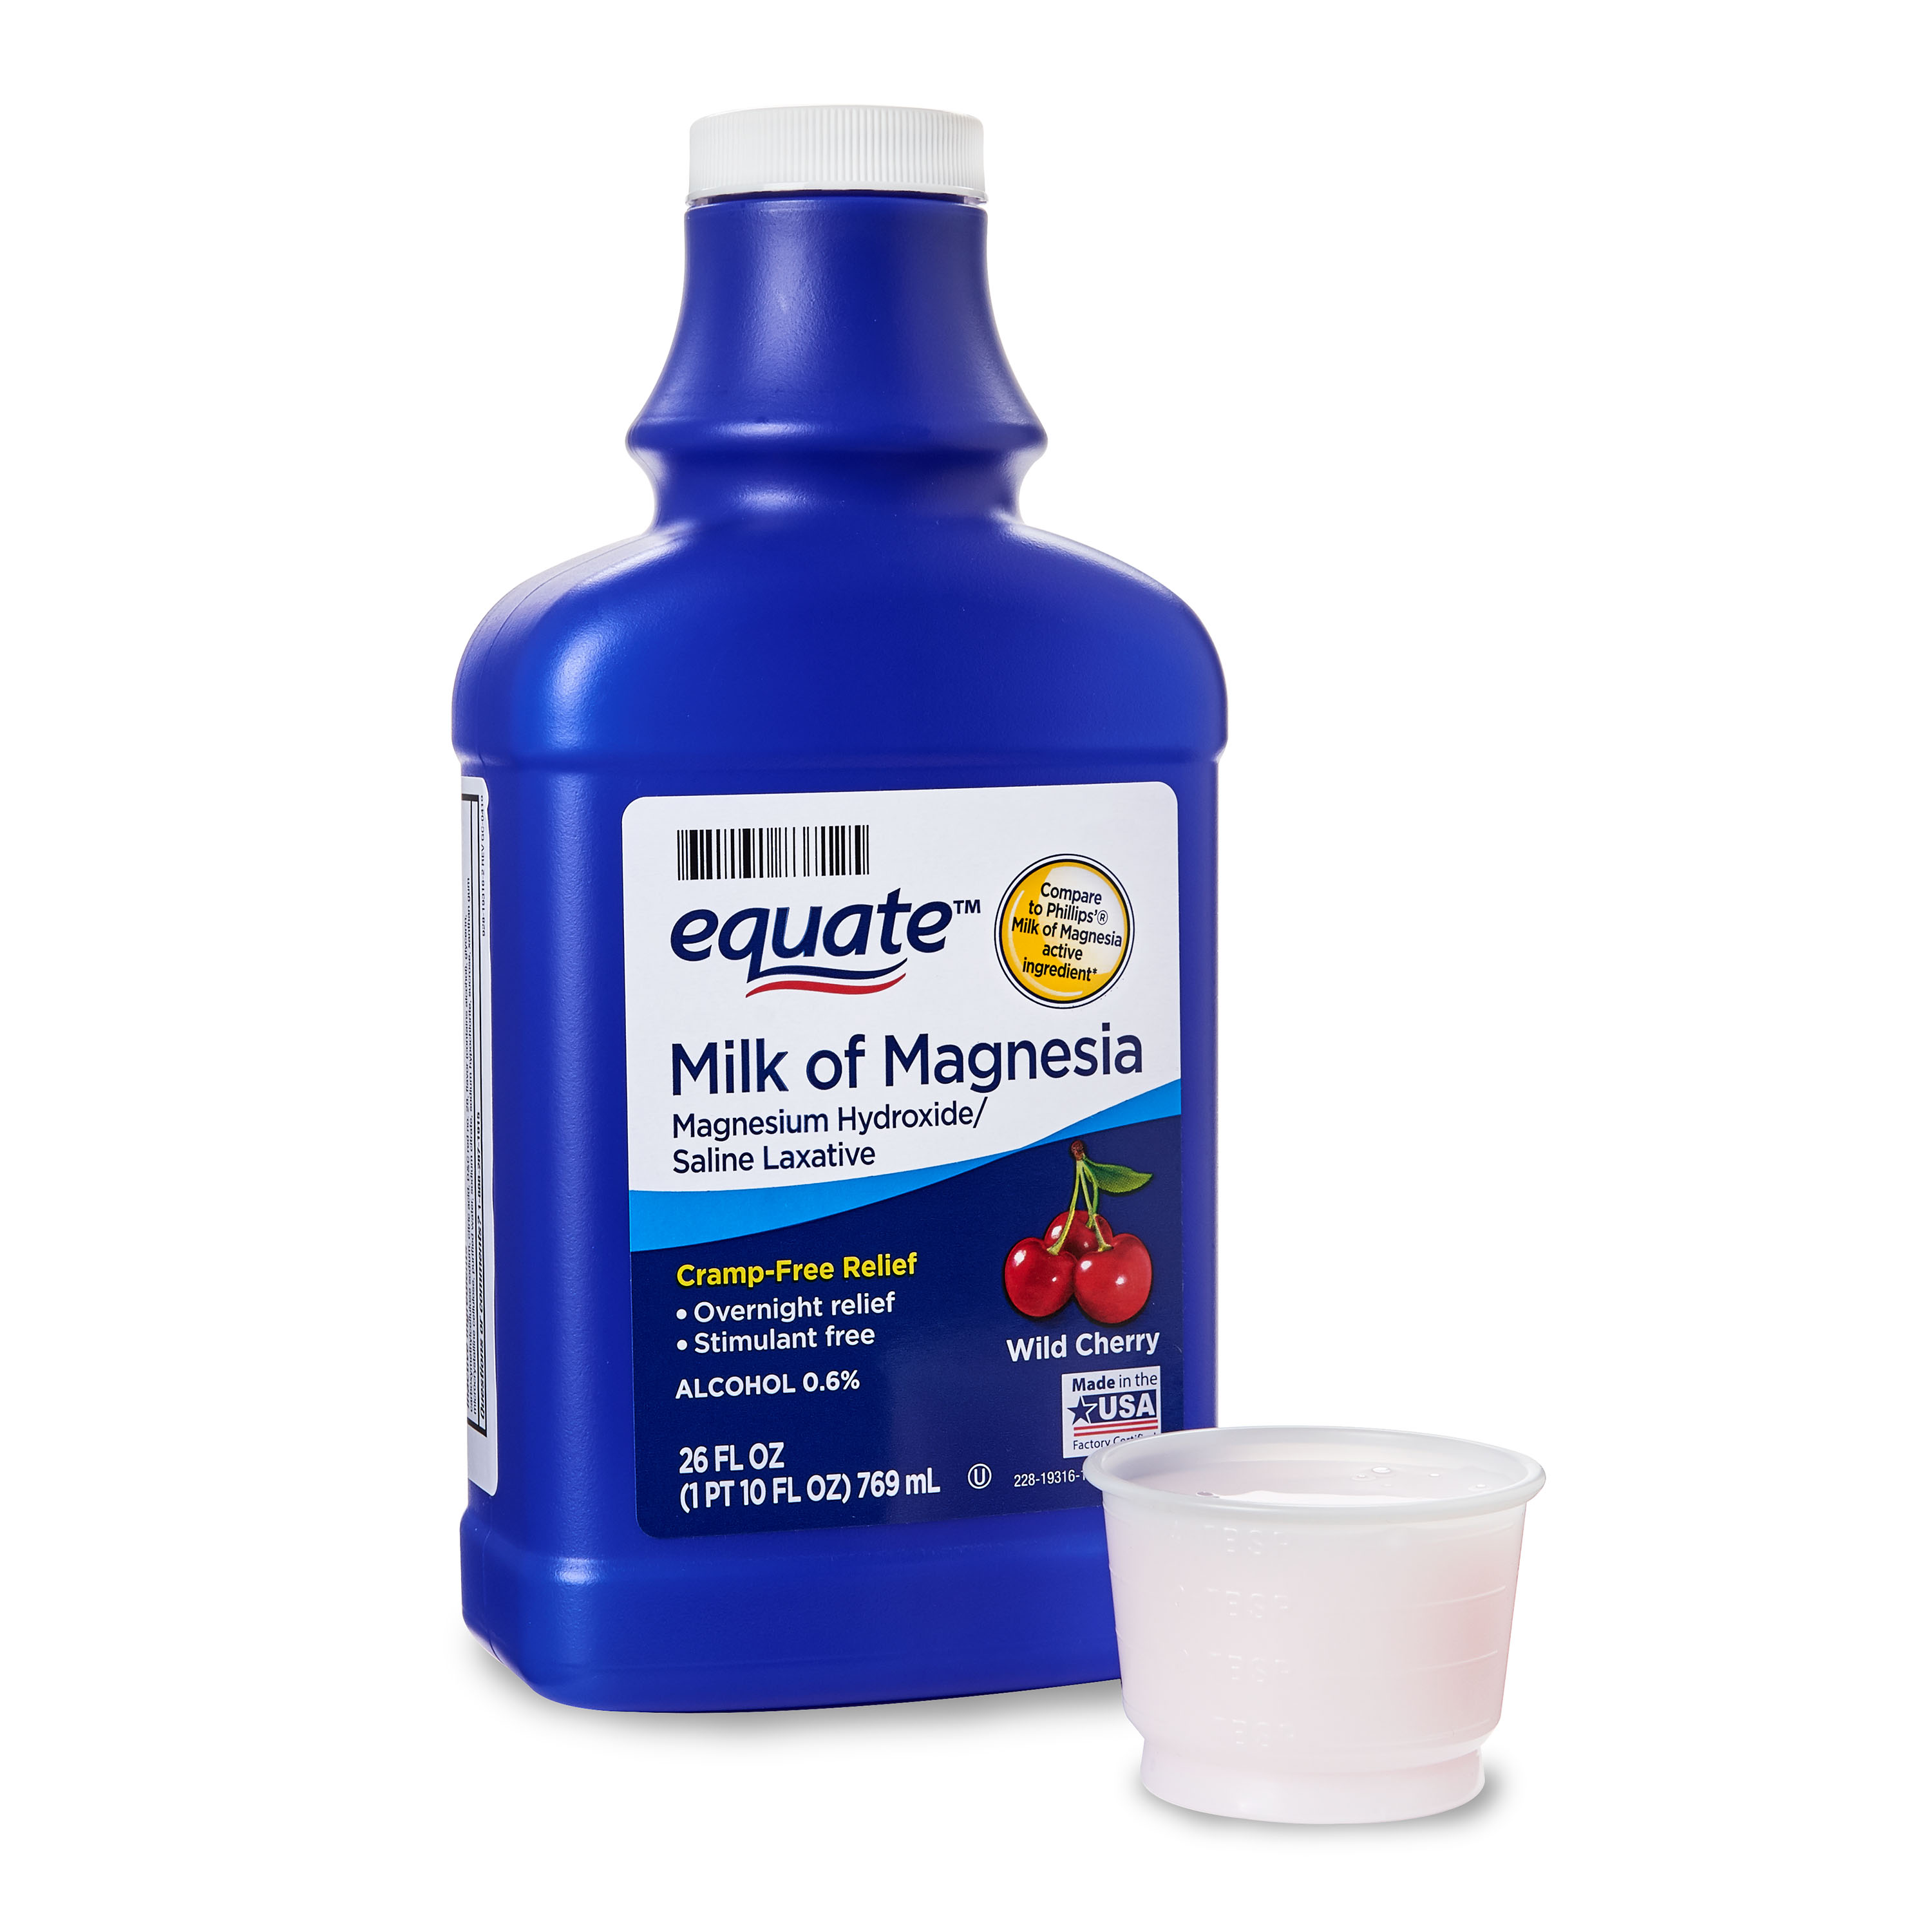 Equate Wild Cherry Milk of Magnesia, 26 fl. oz., over-the-counter, Laxative - image 1 of 9